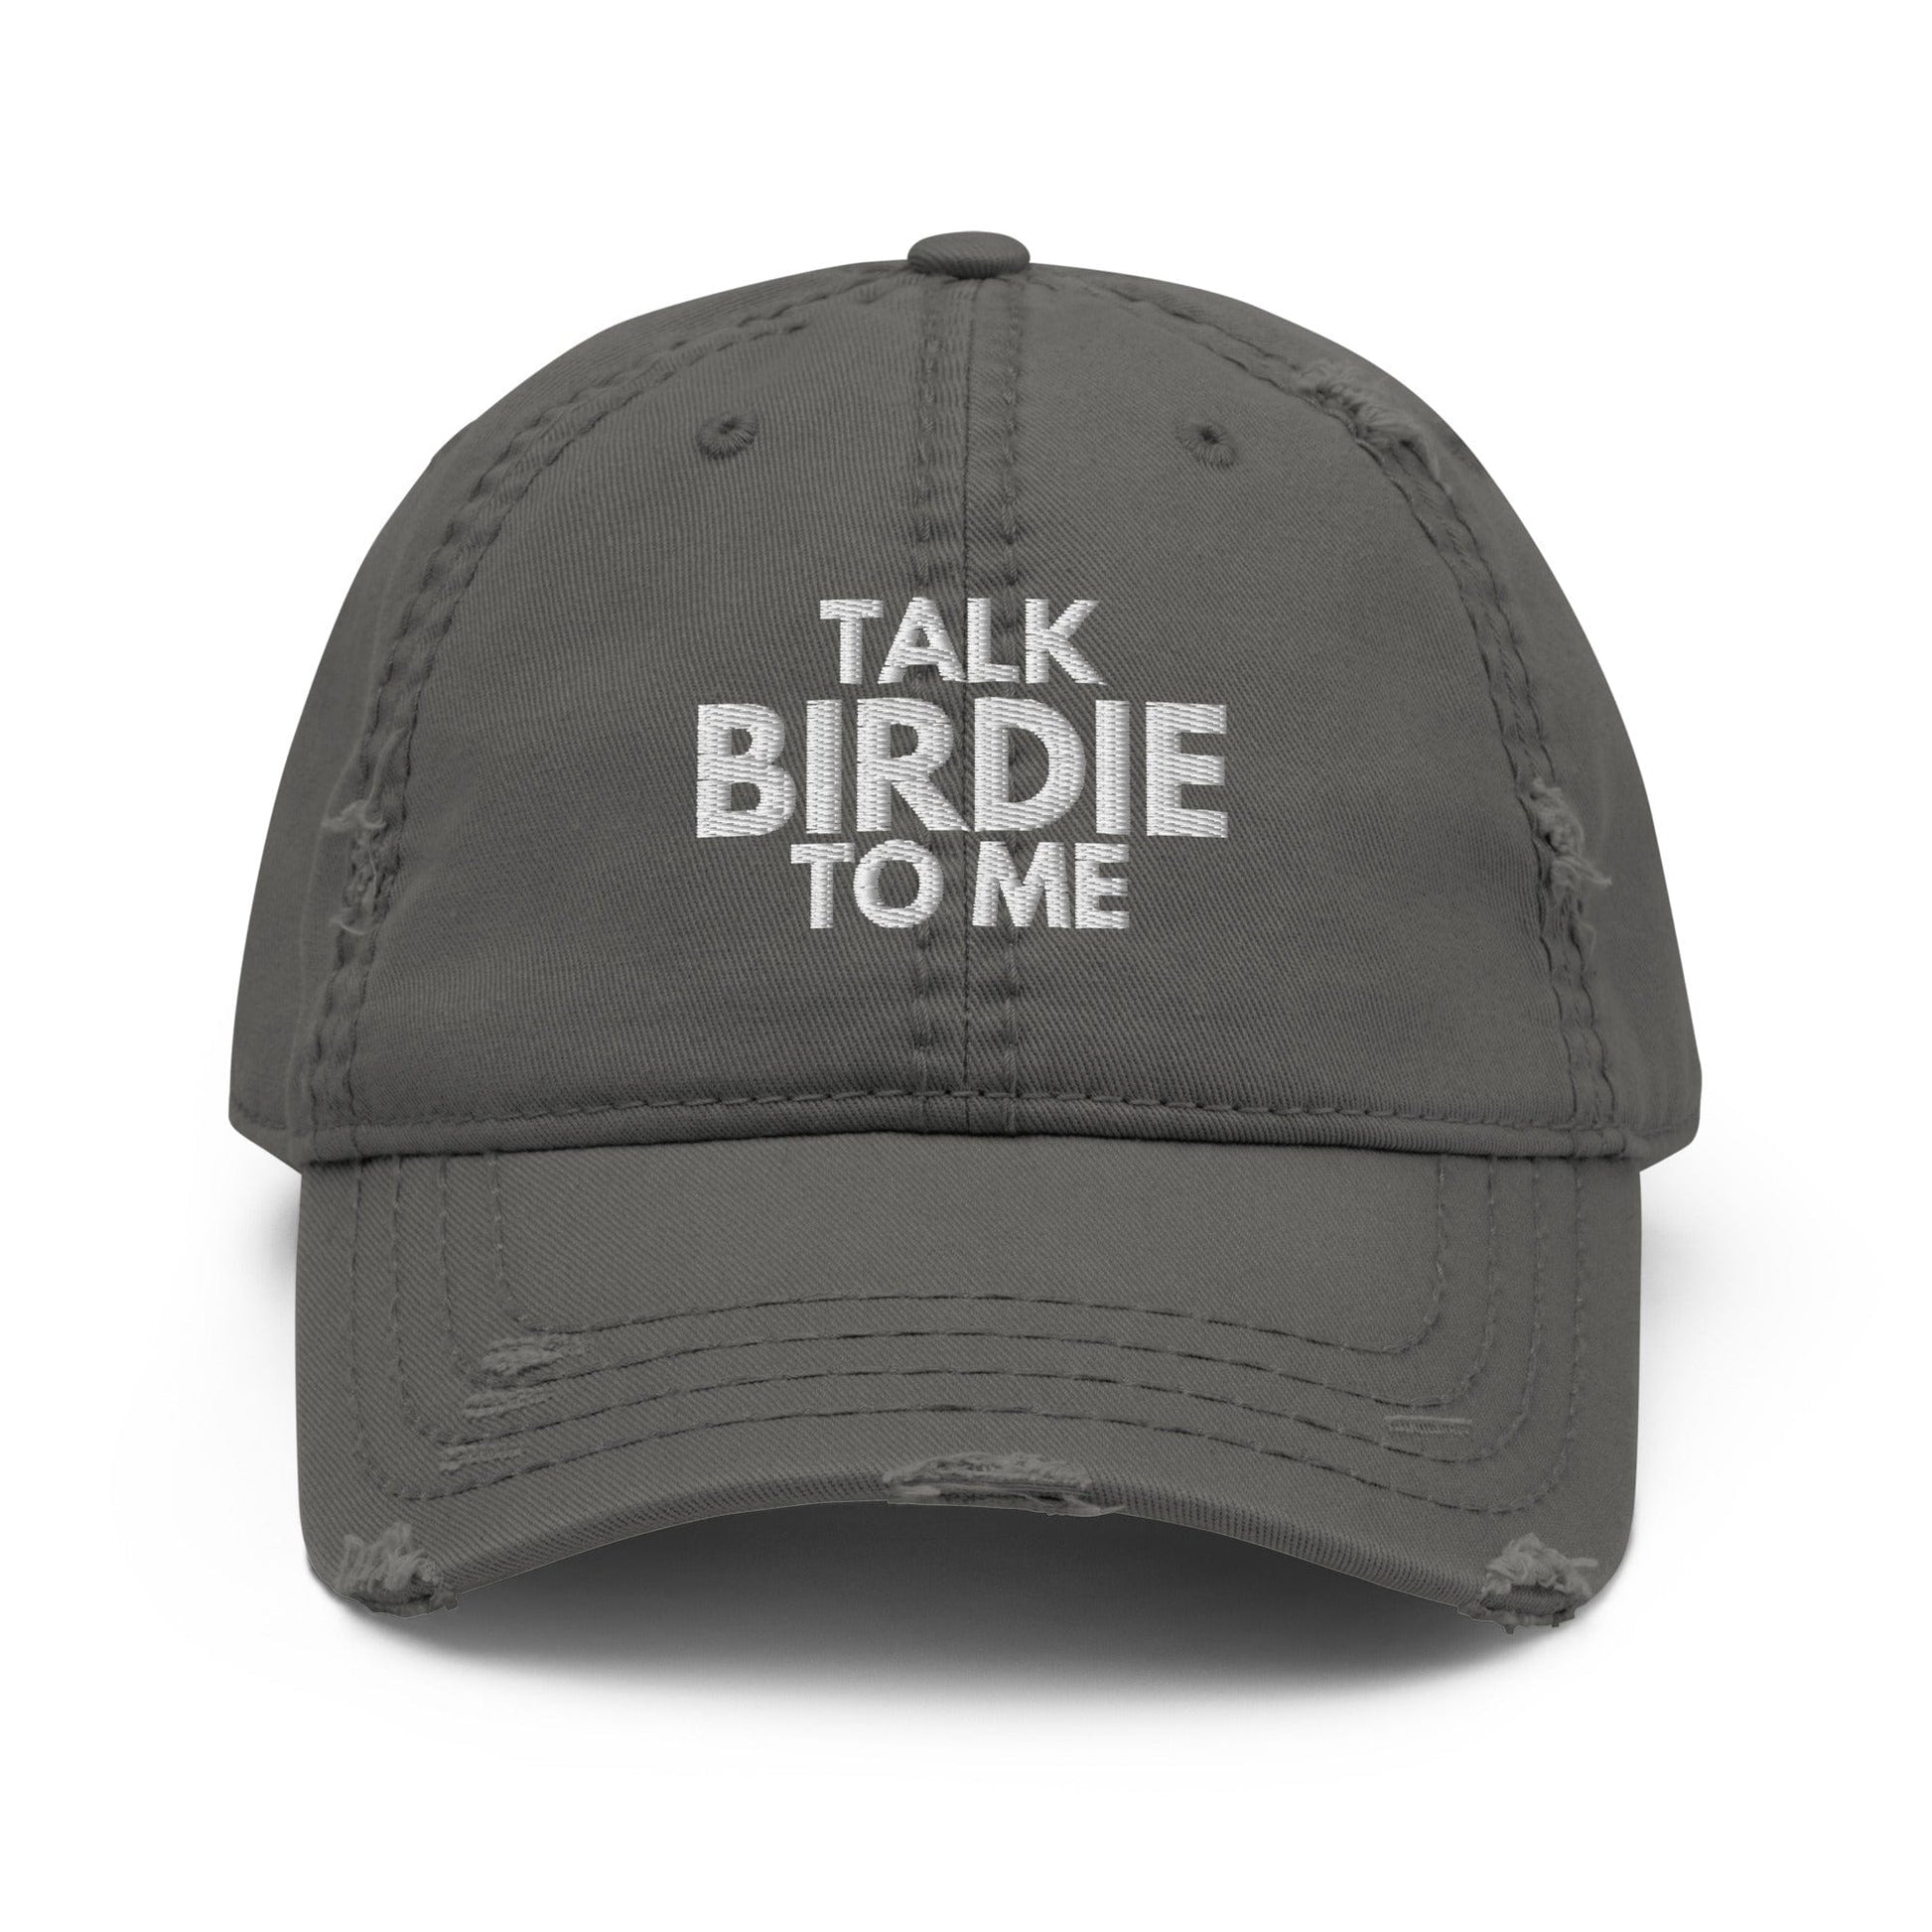 Funny Golfer Gifts  Distressed Cap Charcoal Grey Talk Birdie To Me Hat Distressed Hat